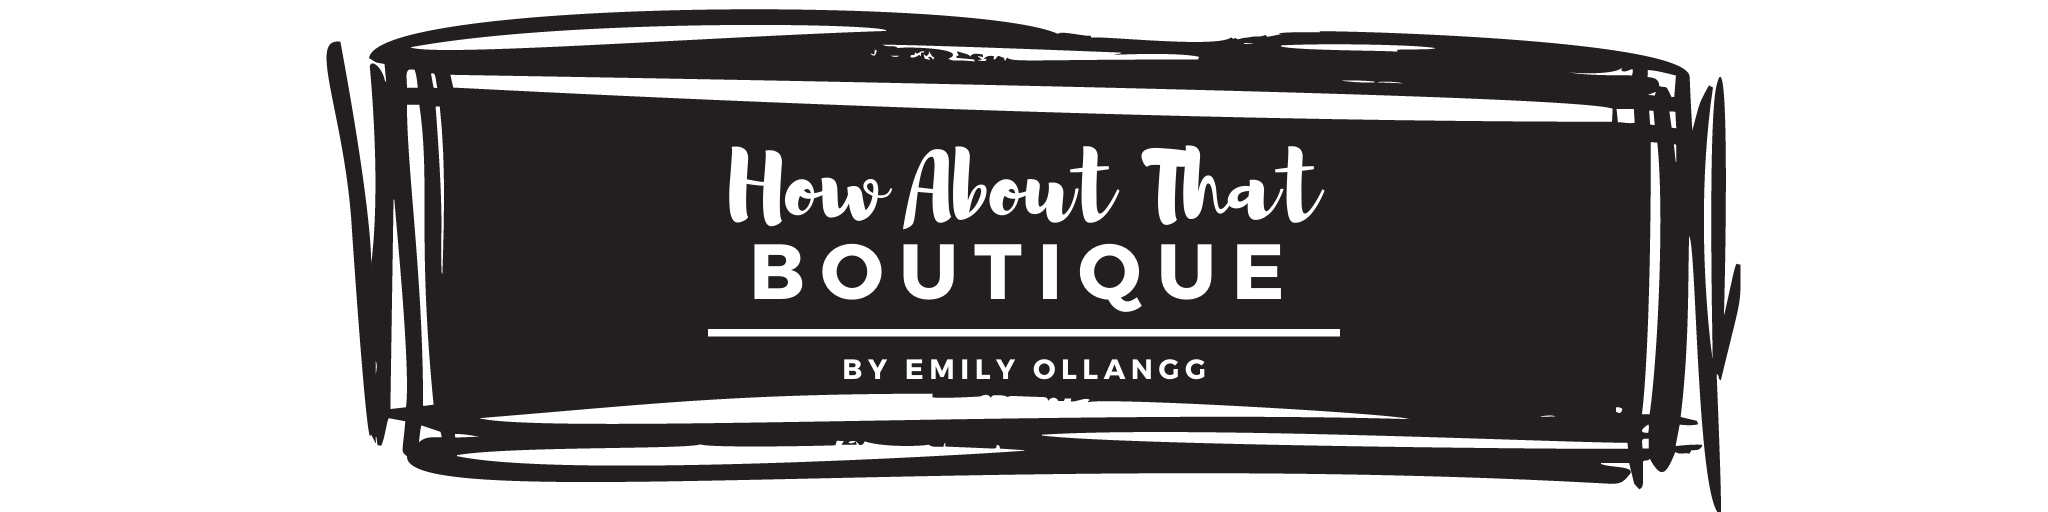 HOW ABOUT THAT BOUTIQUE BY EMILY OLLANGG